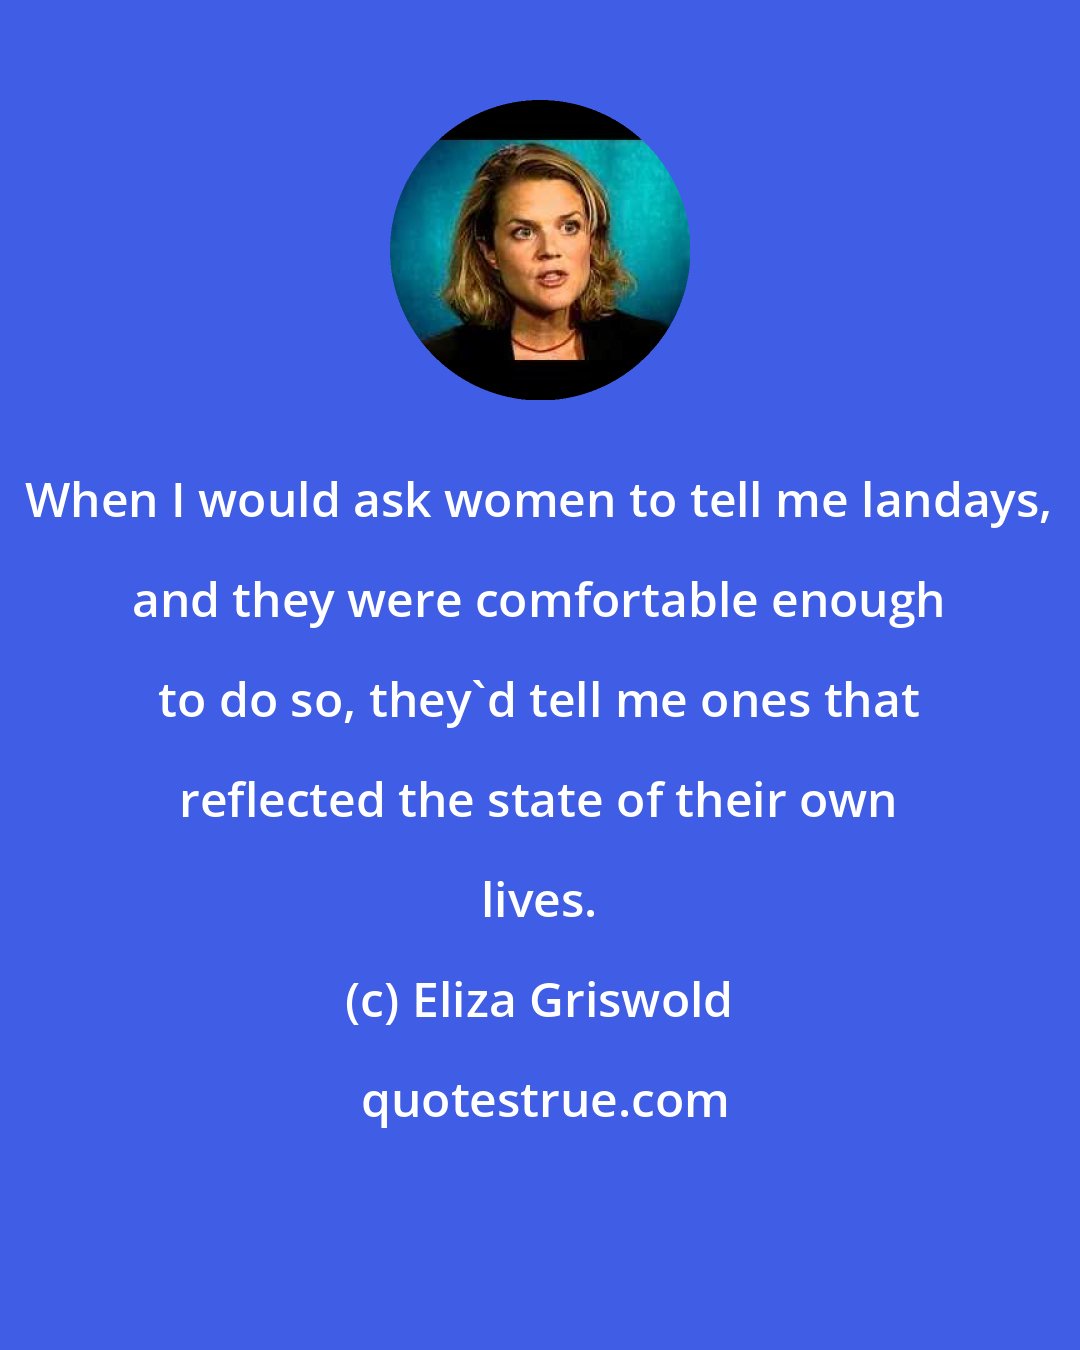 Eliza Griswold: When I would ask women to tell me landays, and they were comfortable enough to do so, they'd tell me ones that reflected the state of their own lives.